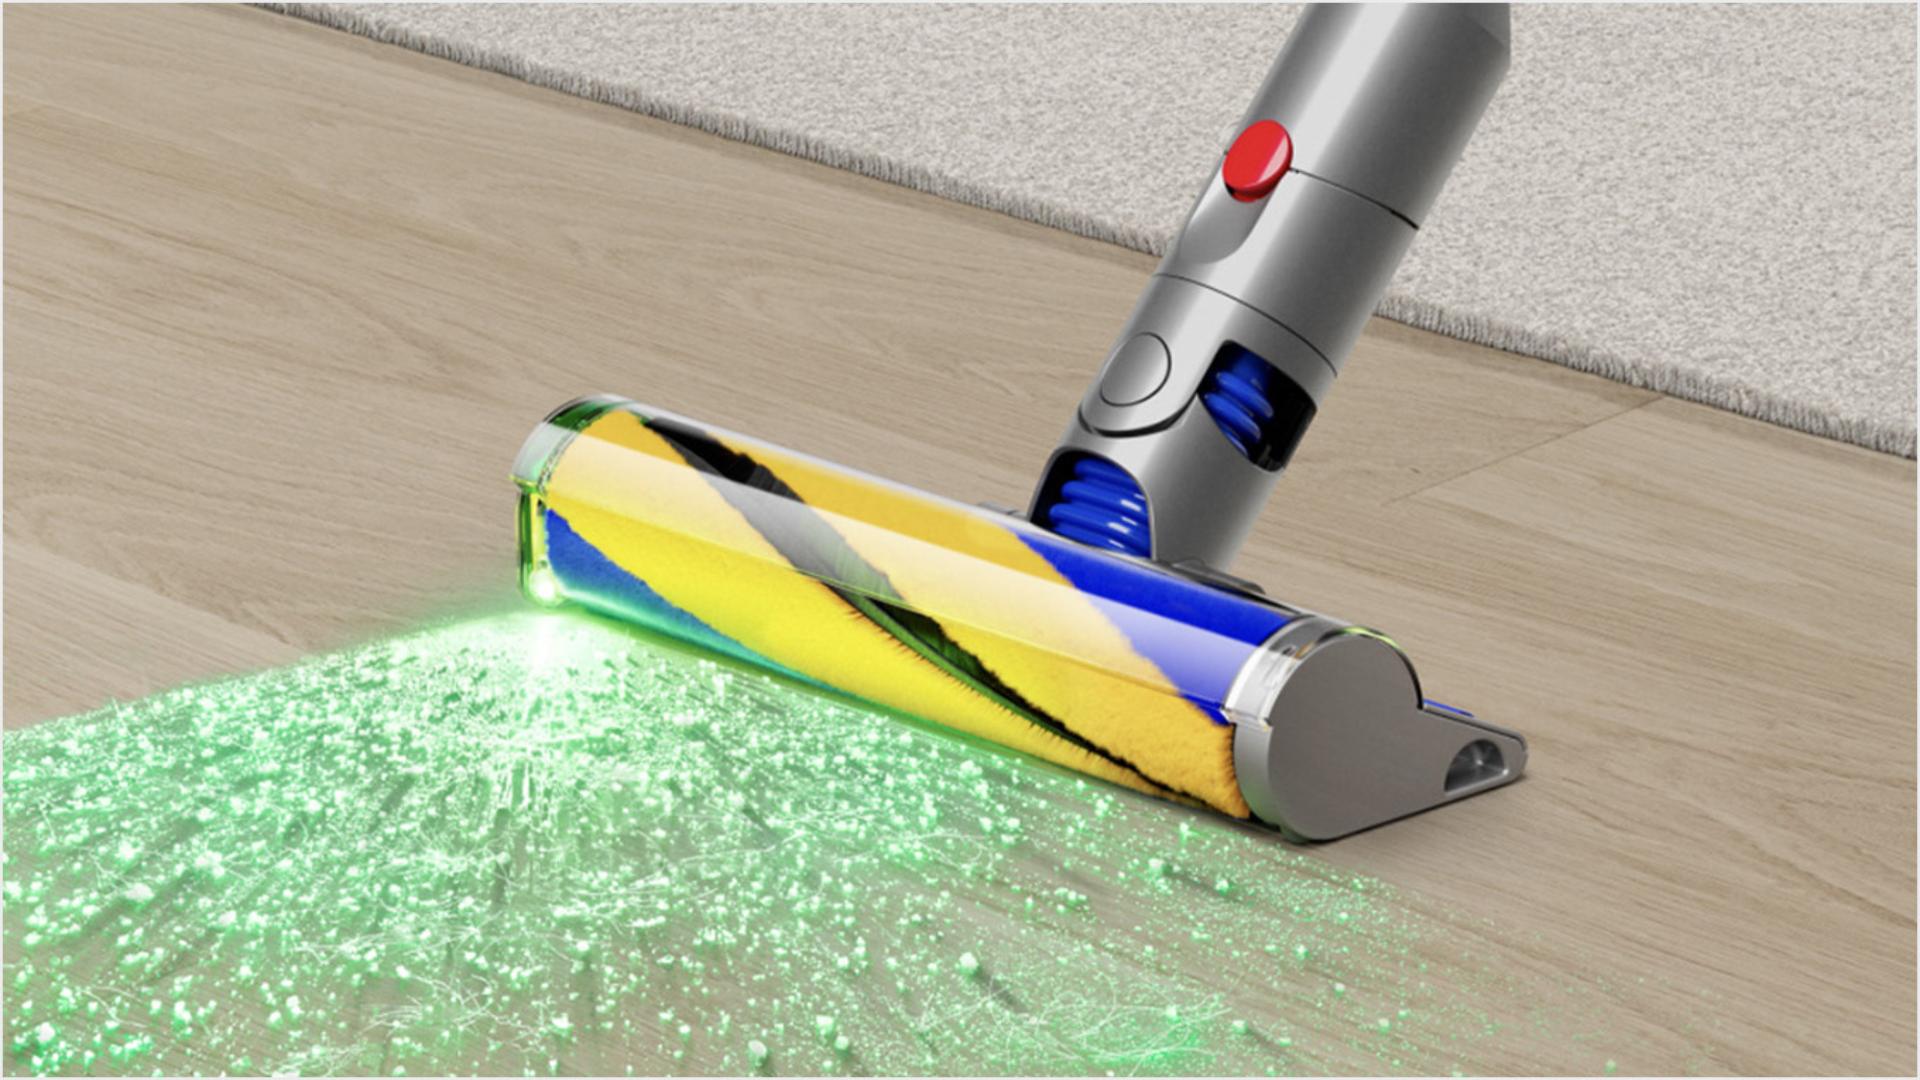 Profile of the green blade of light emitting from the illuminating cleaner head.